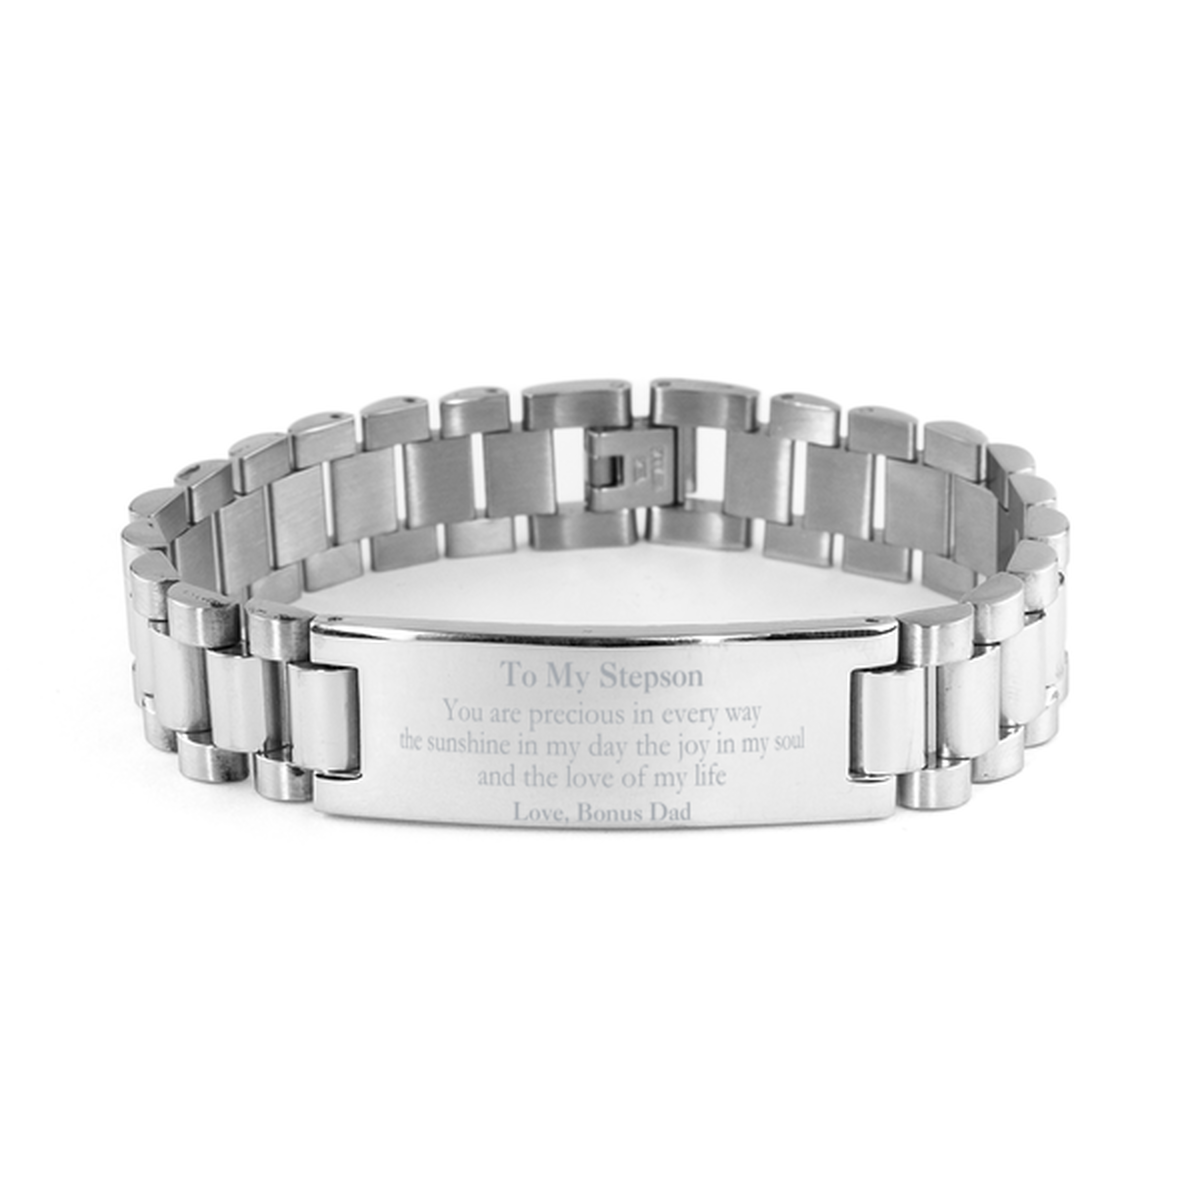 Graduation Gifts for Stepson Ladder Stainless Steel Bracelet Present from Bonus Dad, Christmas Stepson Birthday Gifts Stepson You are precious in every way the sunshine in my day. Love, Bonus Dad